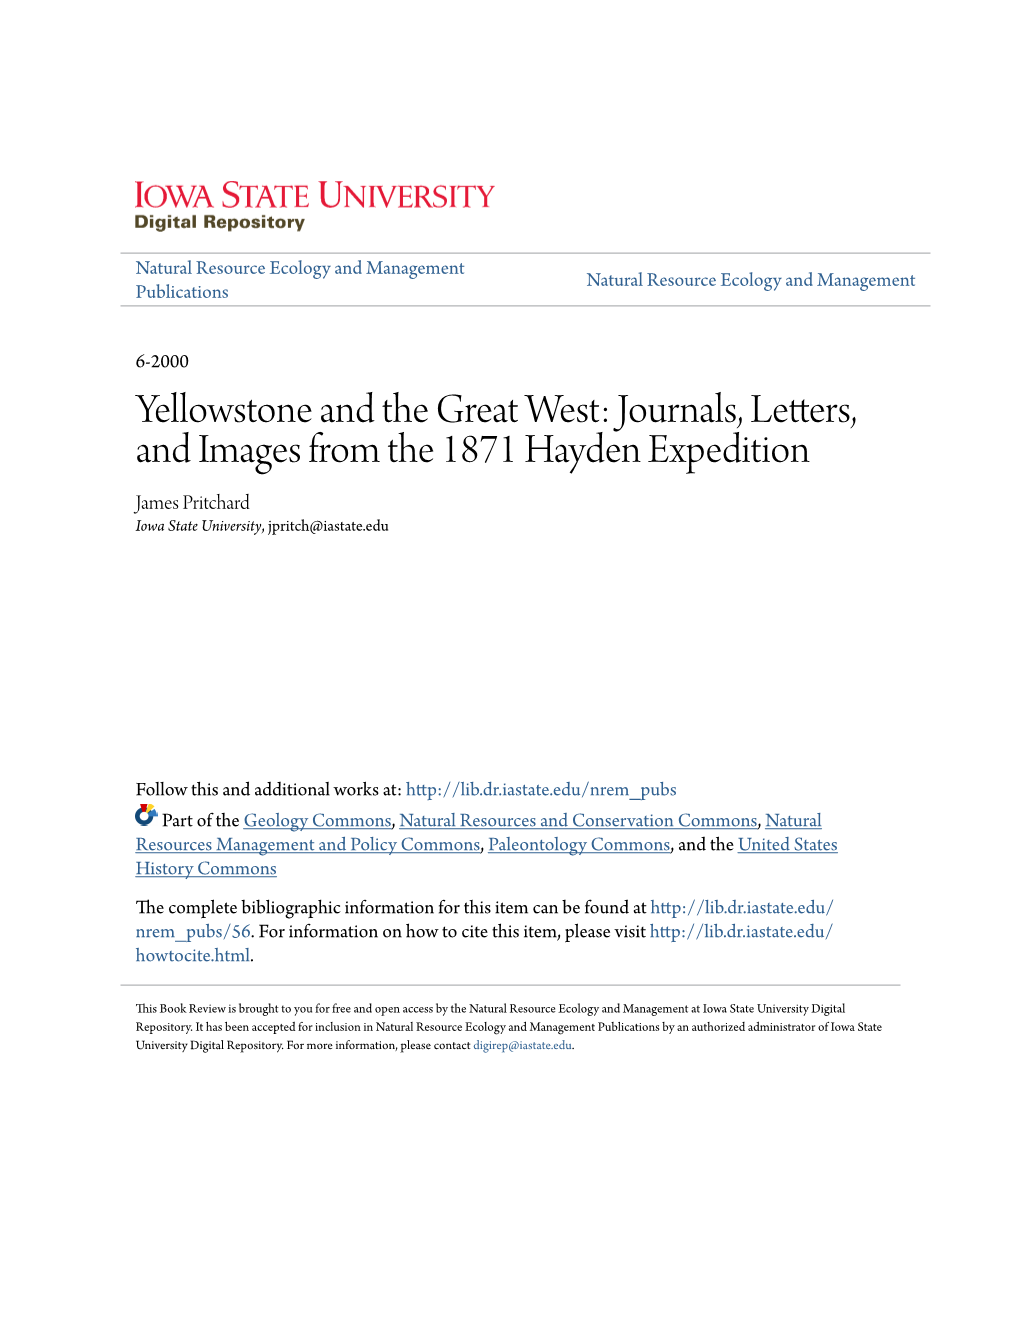 Yellowstone and the Great West: Journals, Letters, and Images from the 1871 Hayden Expedition James Pritchard Iowa State University, Jpritch@Iastate.Edu